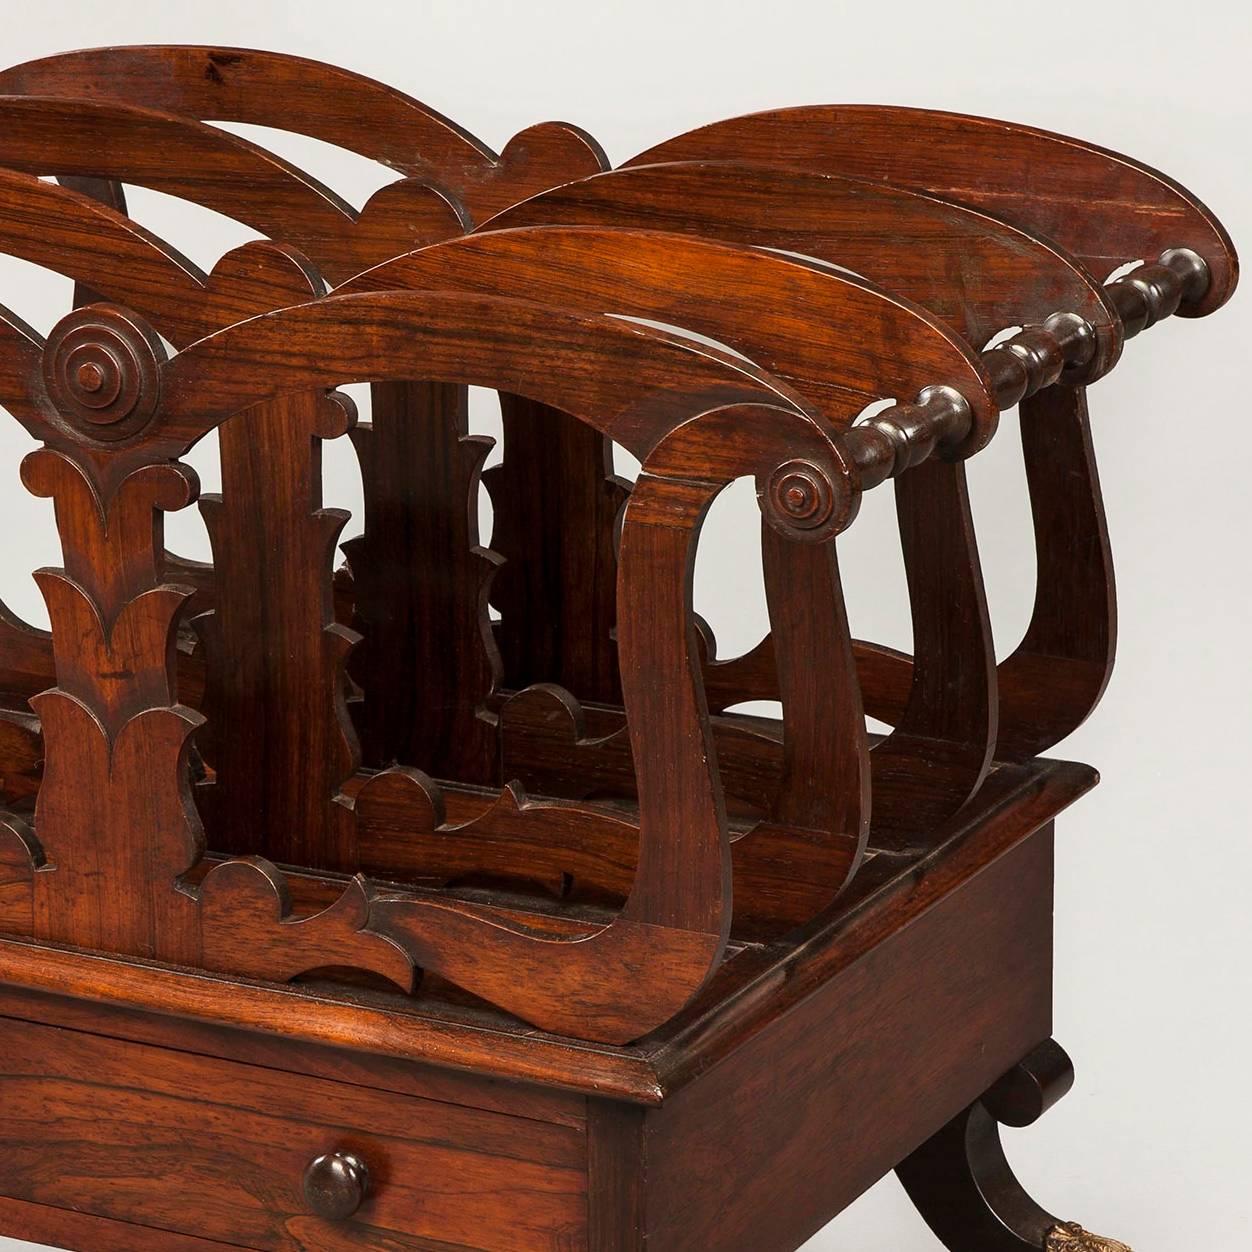 Constructed in goncalo alves, with four divisions, the top rail of arc-en arbalette form, with turned dividers; the central support in the form of a stylised palm tree trunk; a single mahogany lined drawer below and rising on swept legs terminating